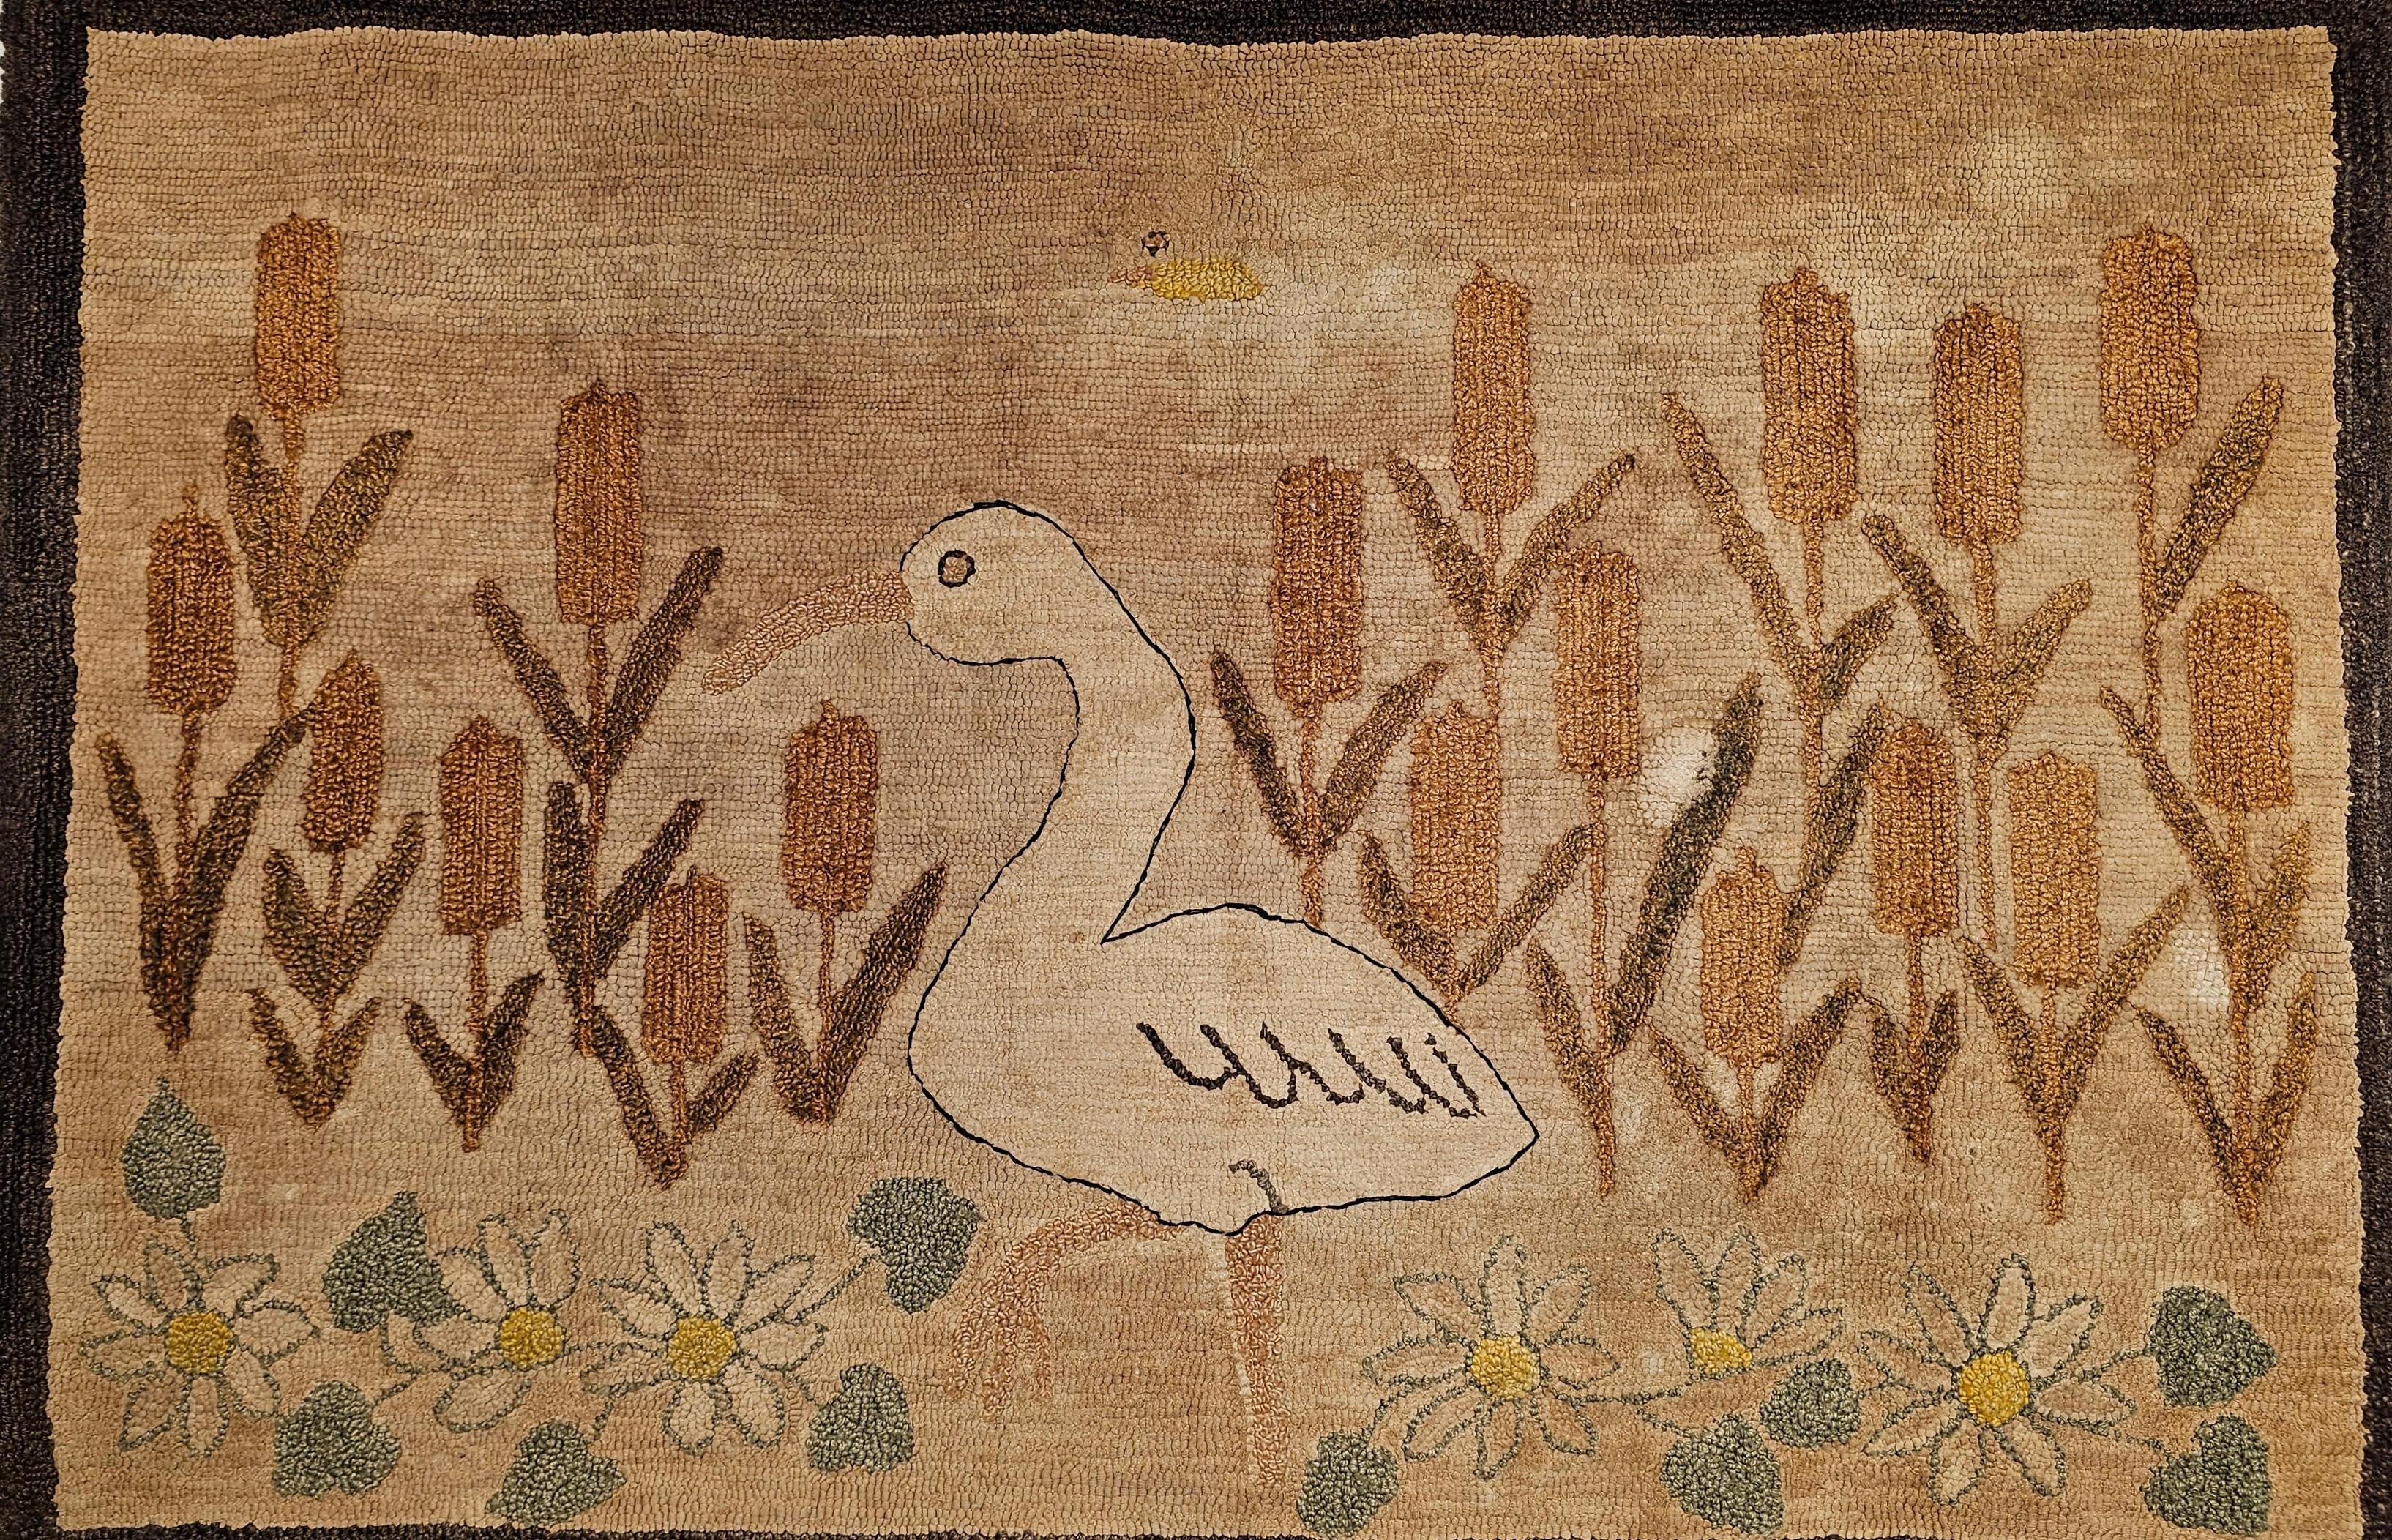 Hand-Crafted Early 20th Century American Hand Hooked Rug in a Bird and Flowers Design For Sale